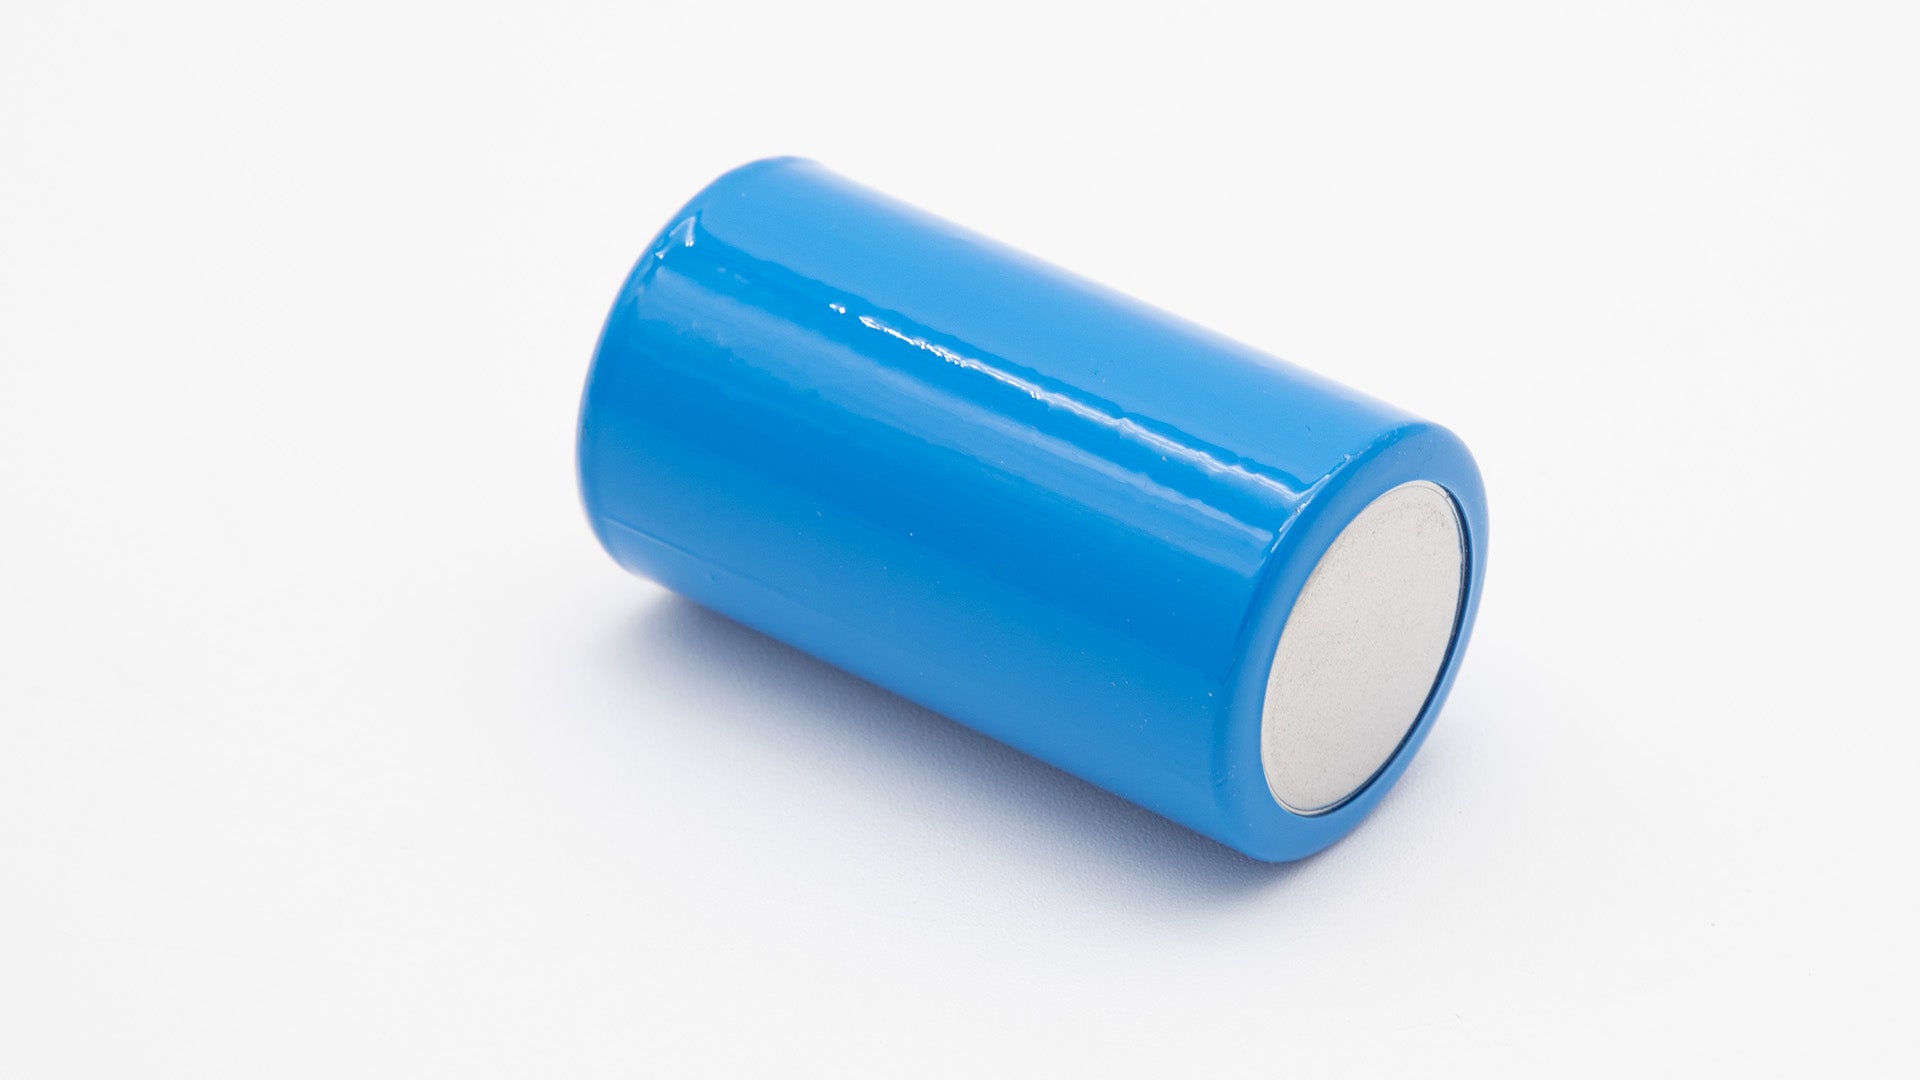 A blue cylindrical object with a white cap